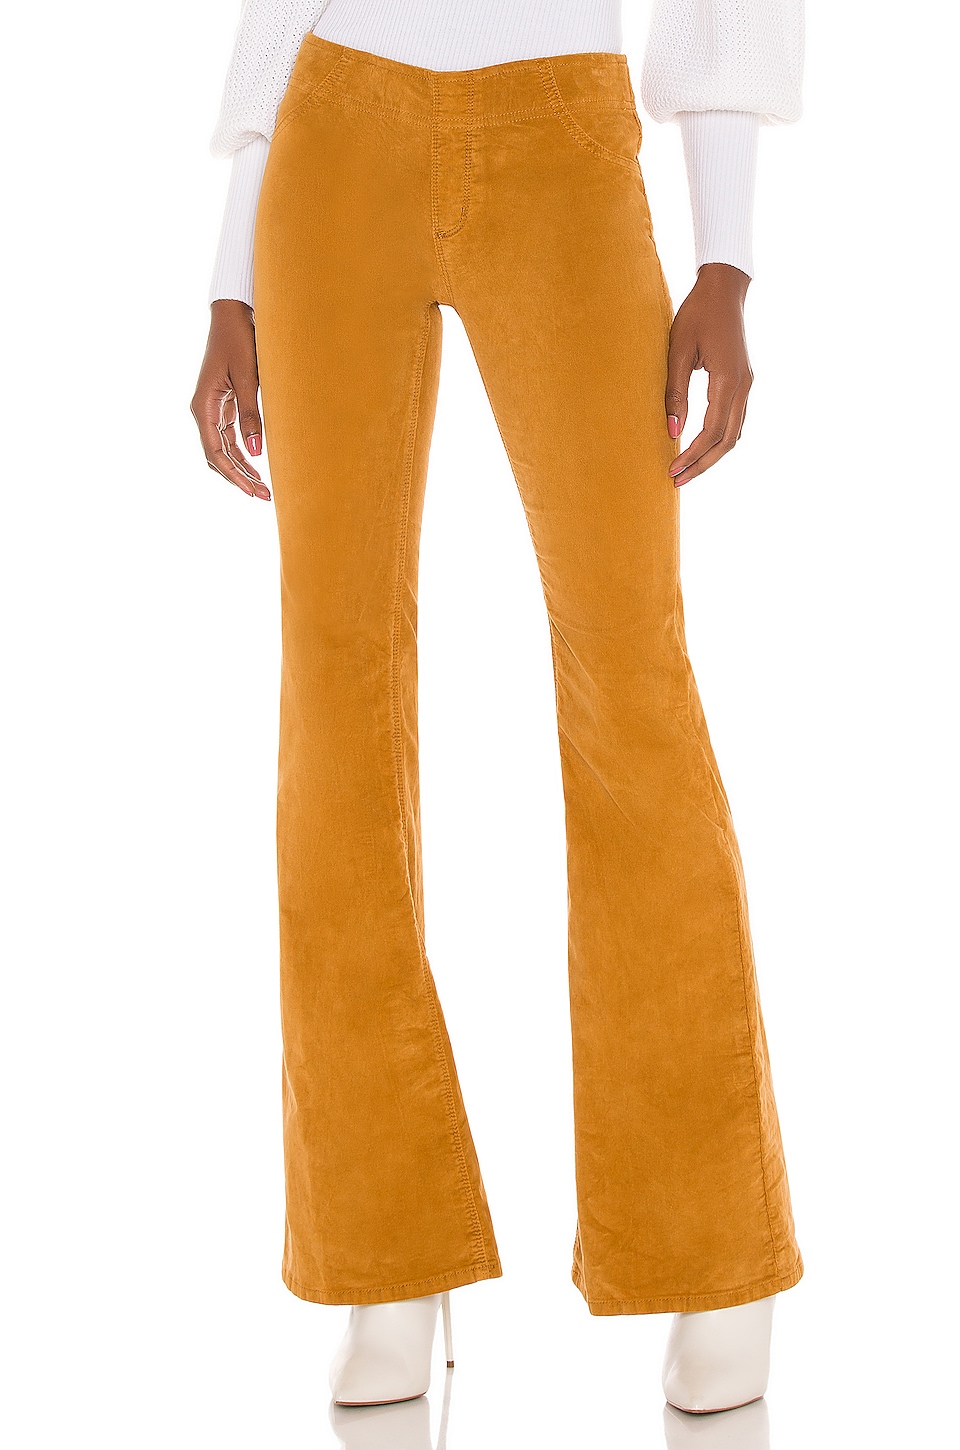 Free People Pull On Cord Flare Pant in Sueded Sun Tan | REVOLVE